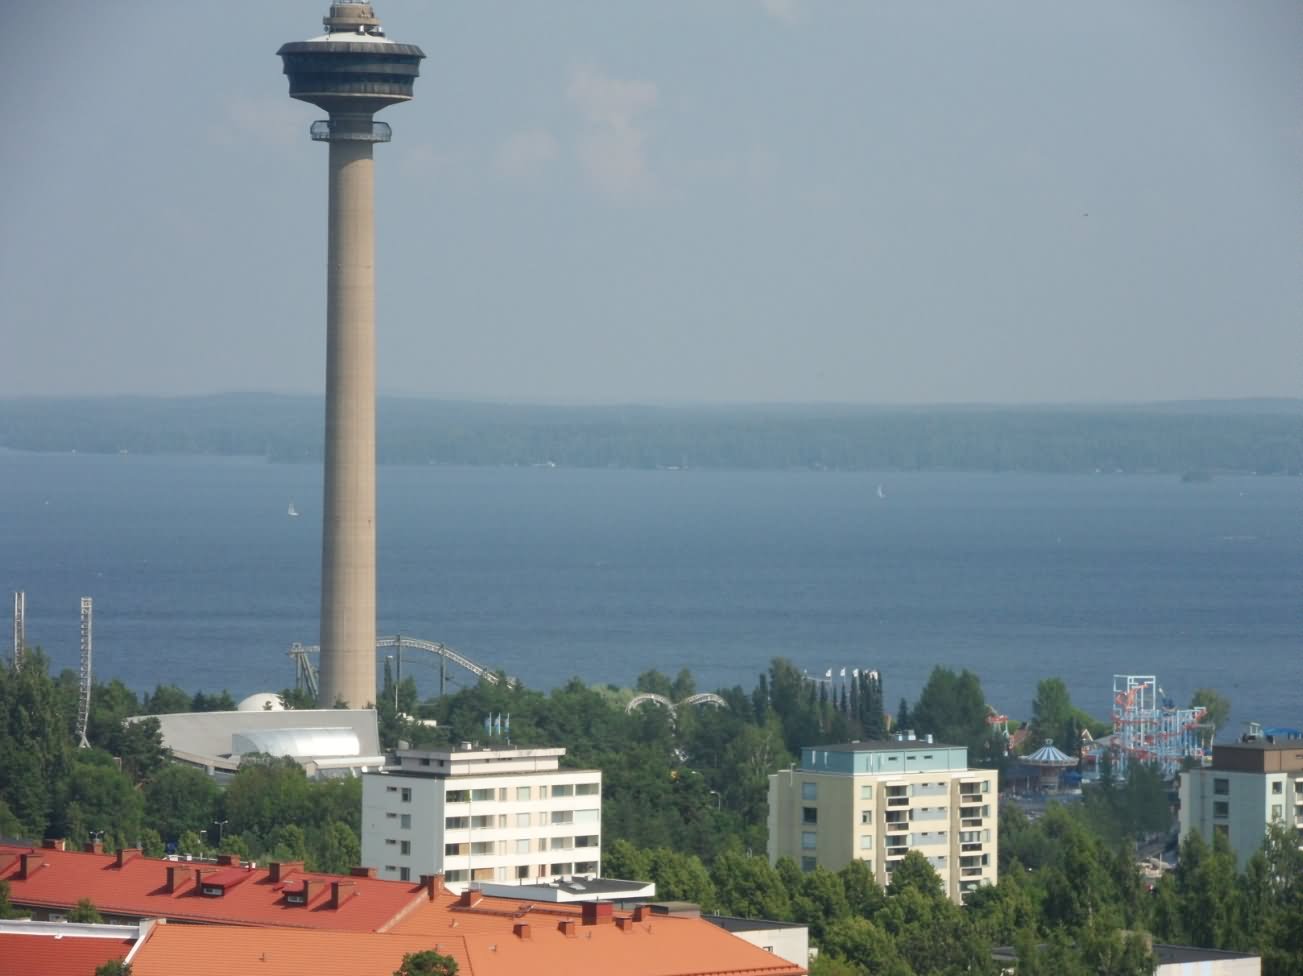 Nasinneula Tower In Tampere, Finland